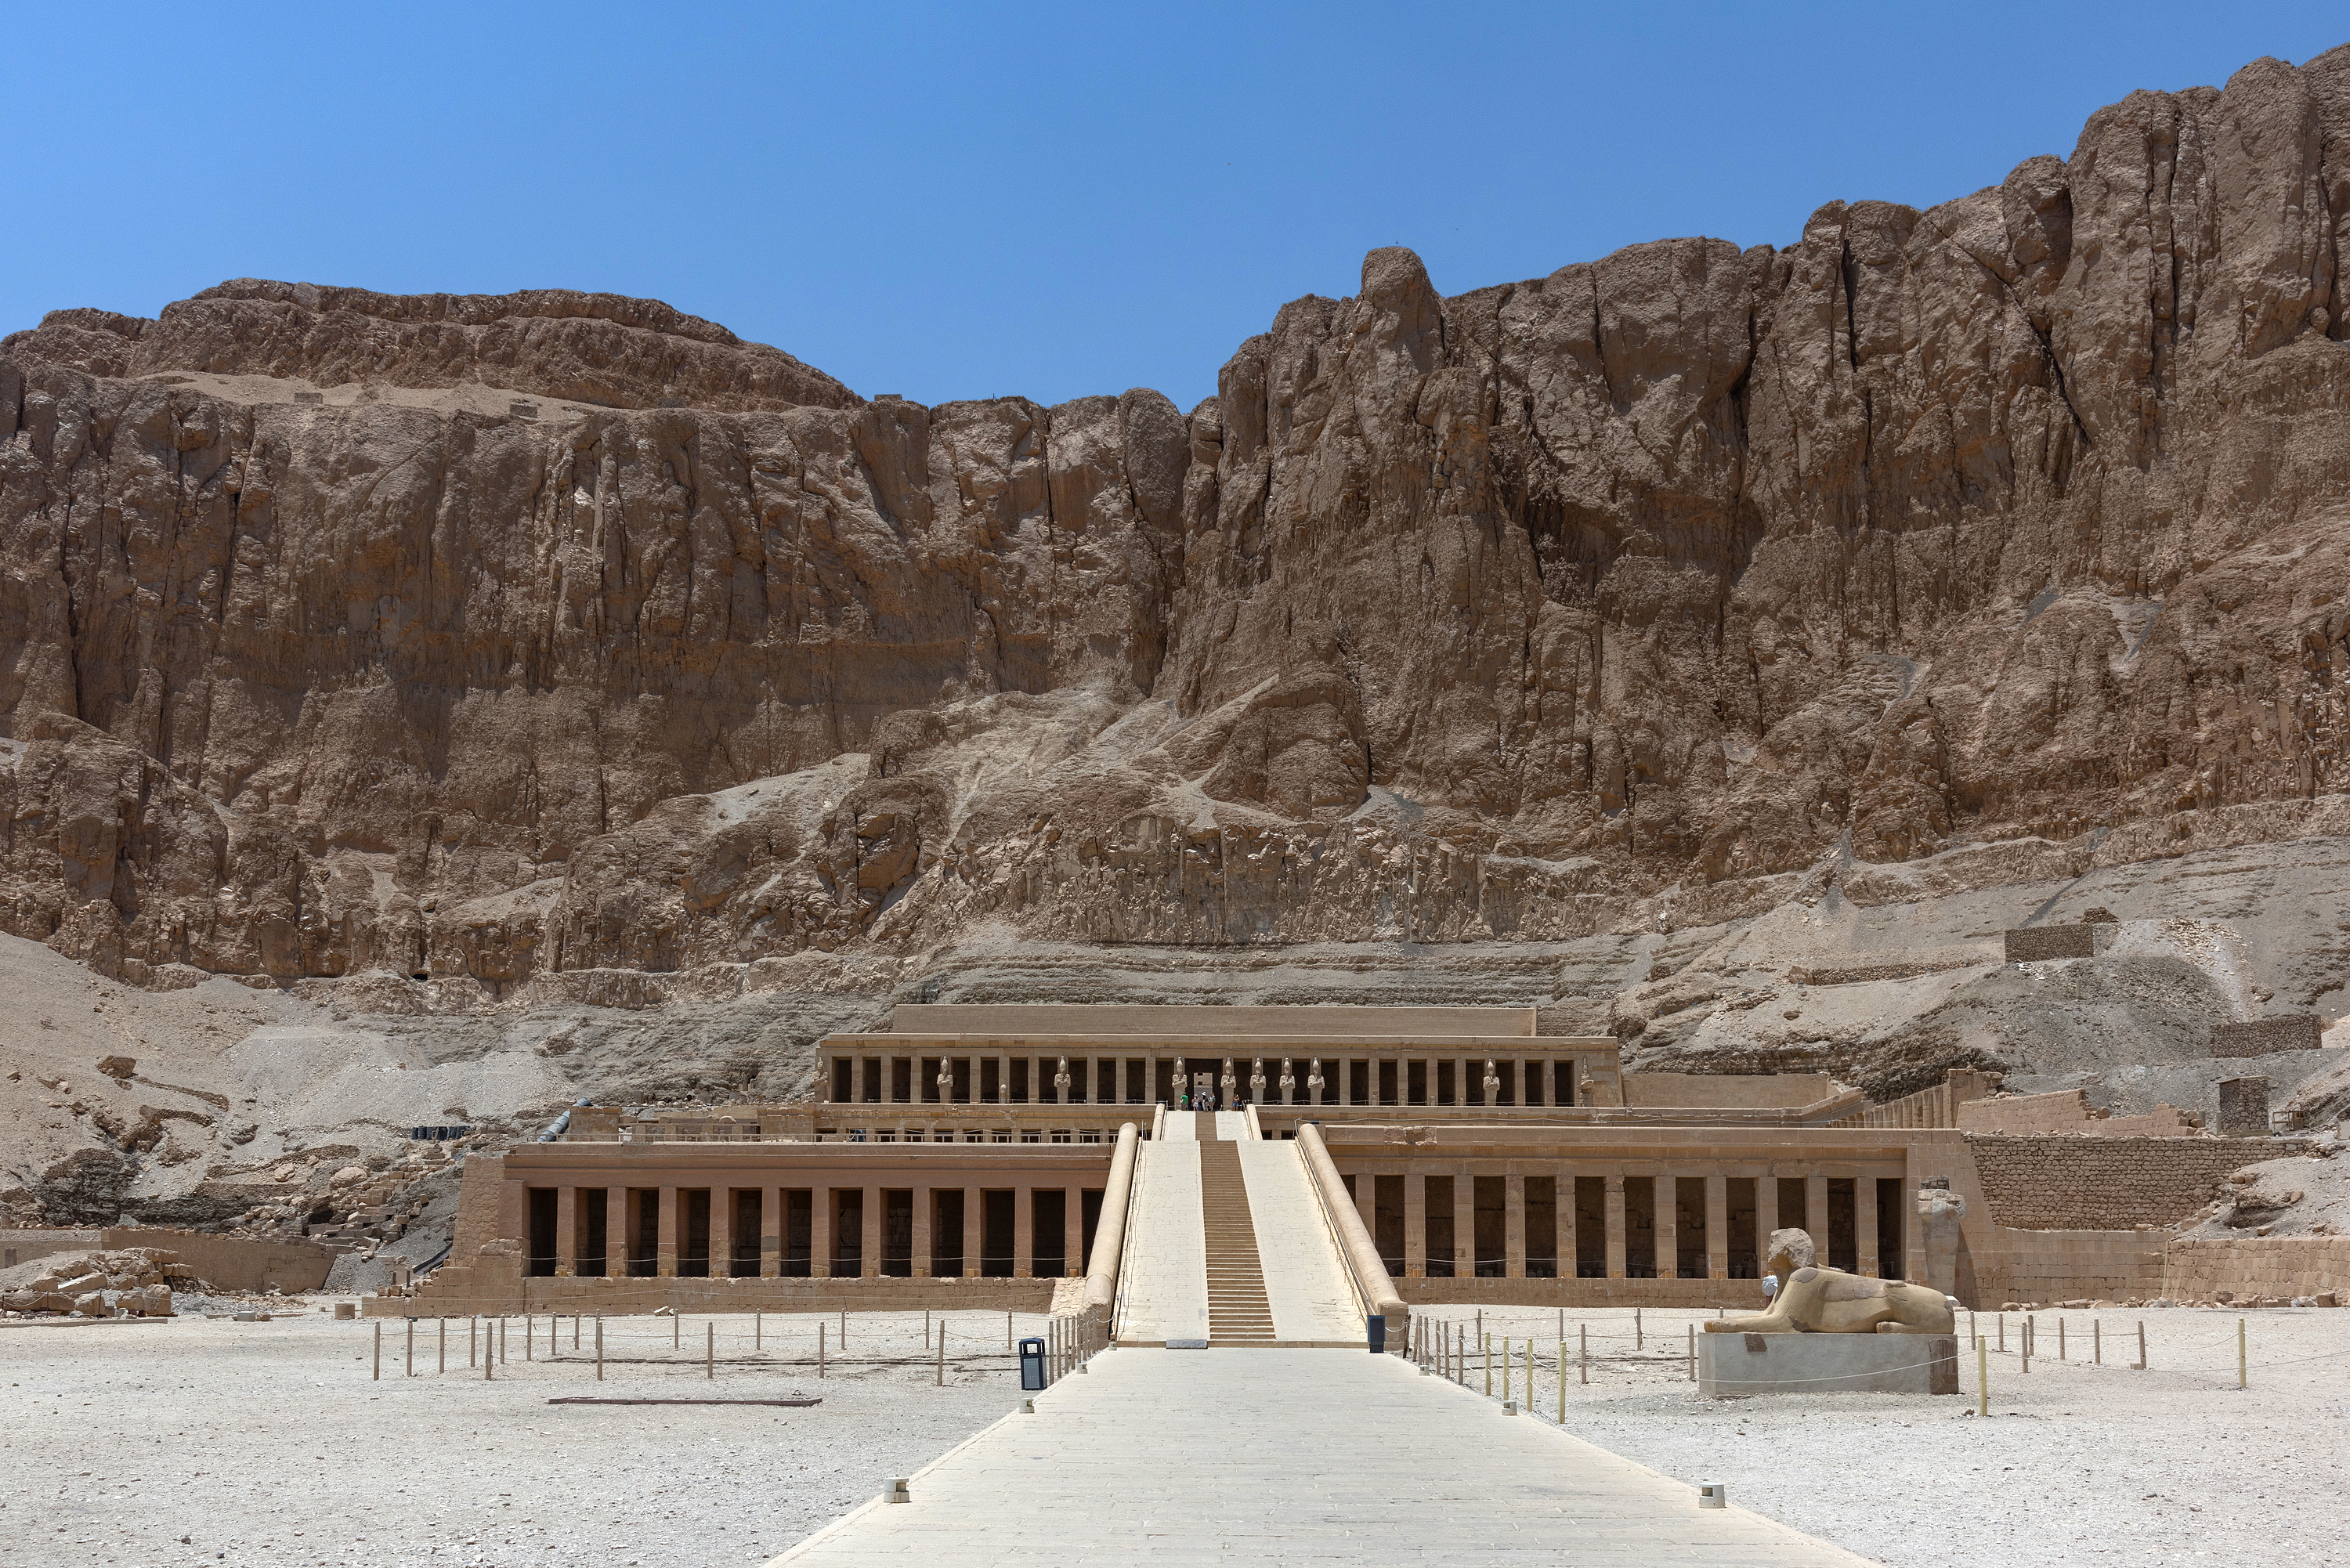 The Temple of Hatshepsut (ca. 1507 BCE) located opposite the city of Luxor. Photo by Scott Bennett